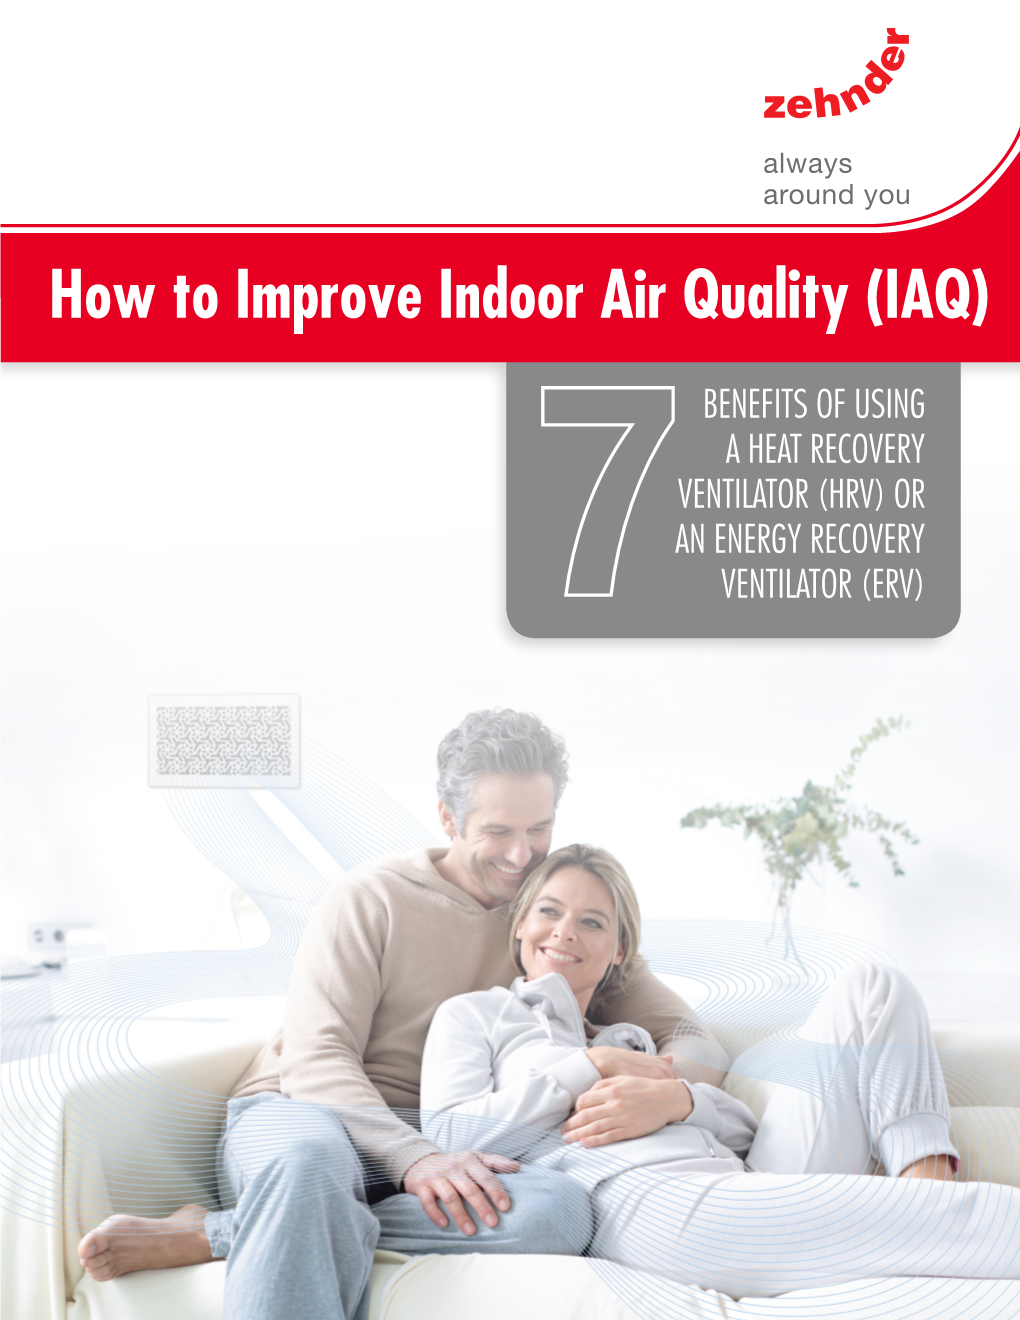 How to Improve Indoor Air Quality (IAQ)